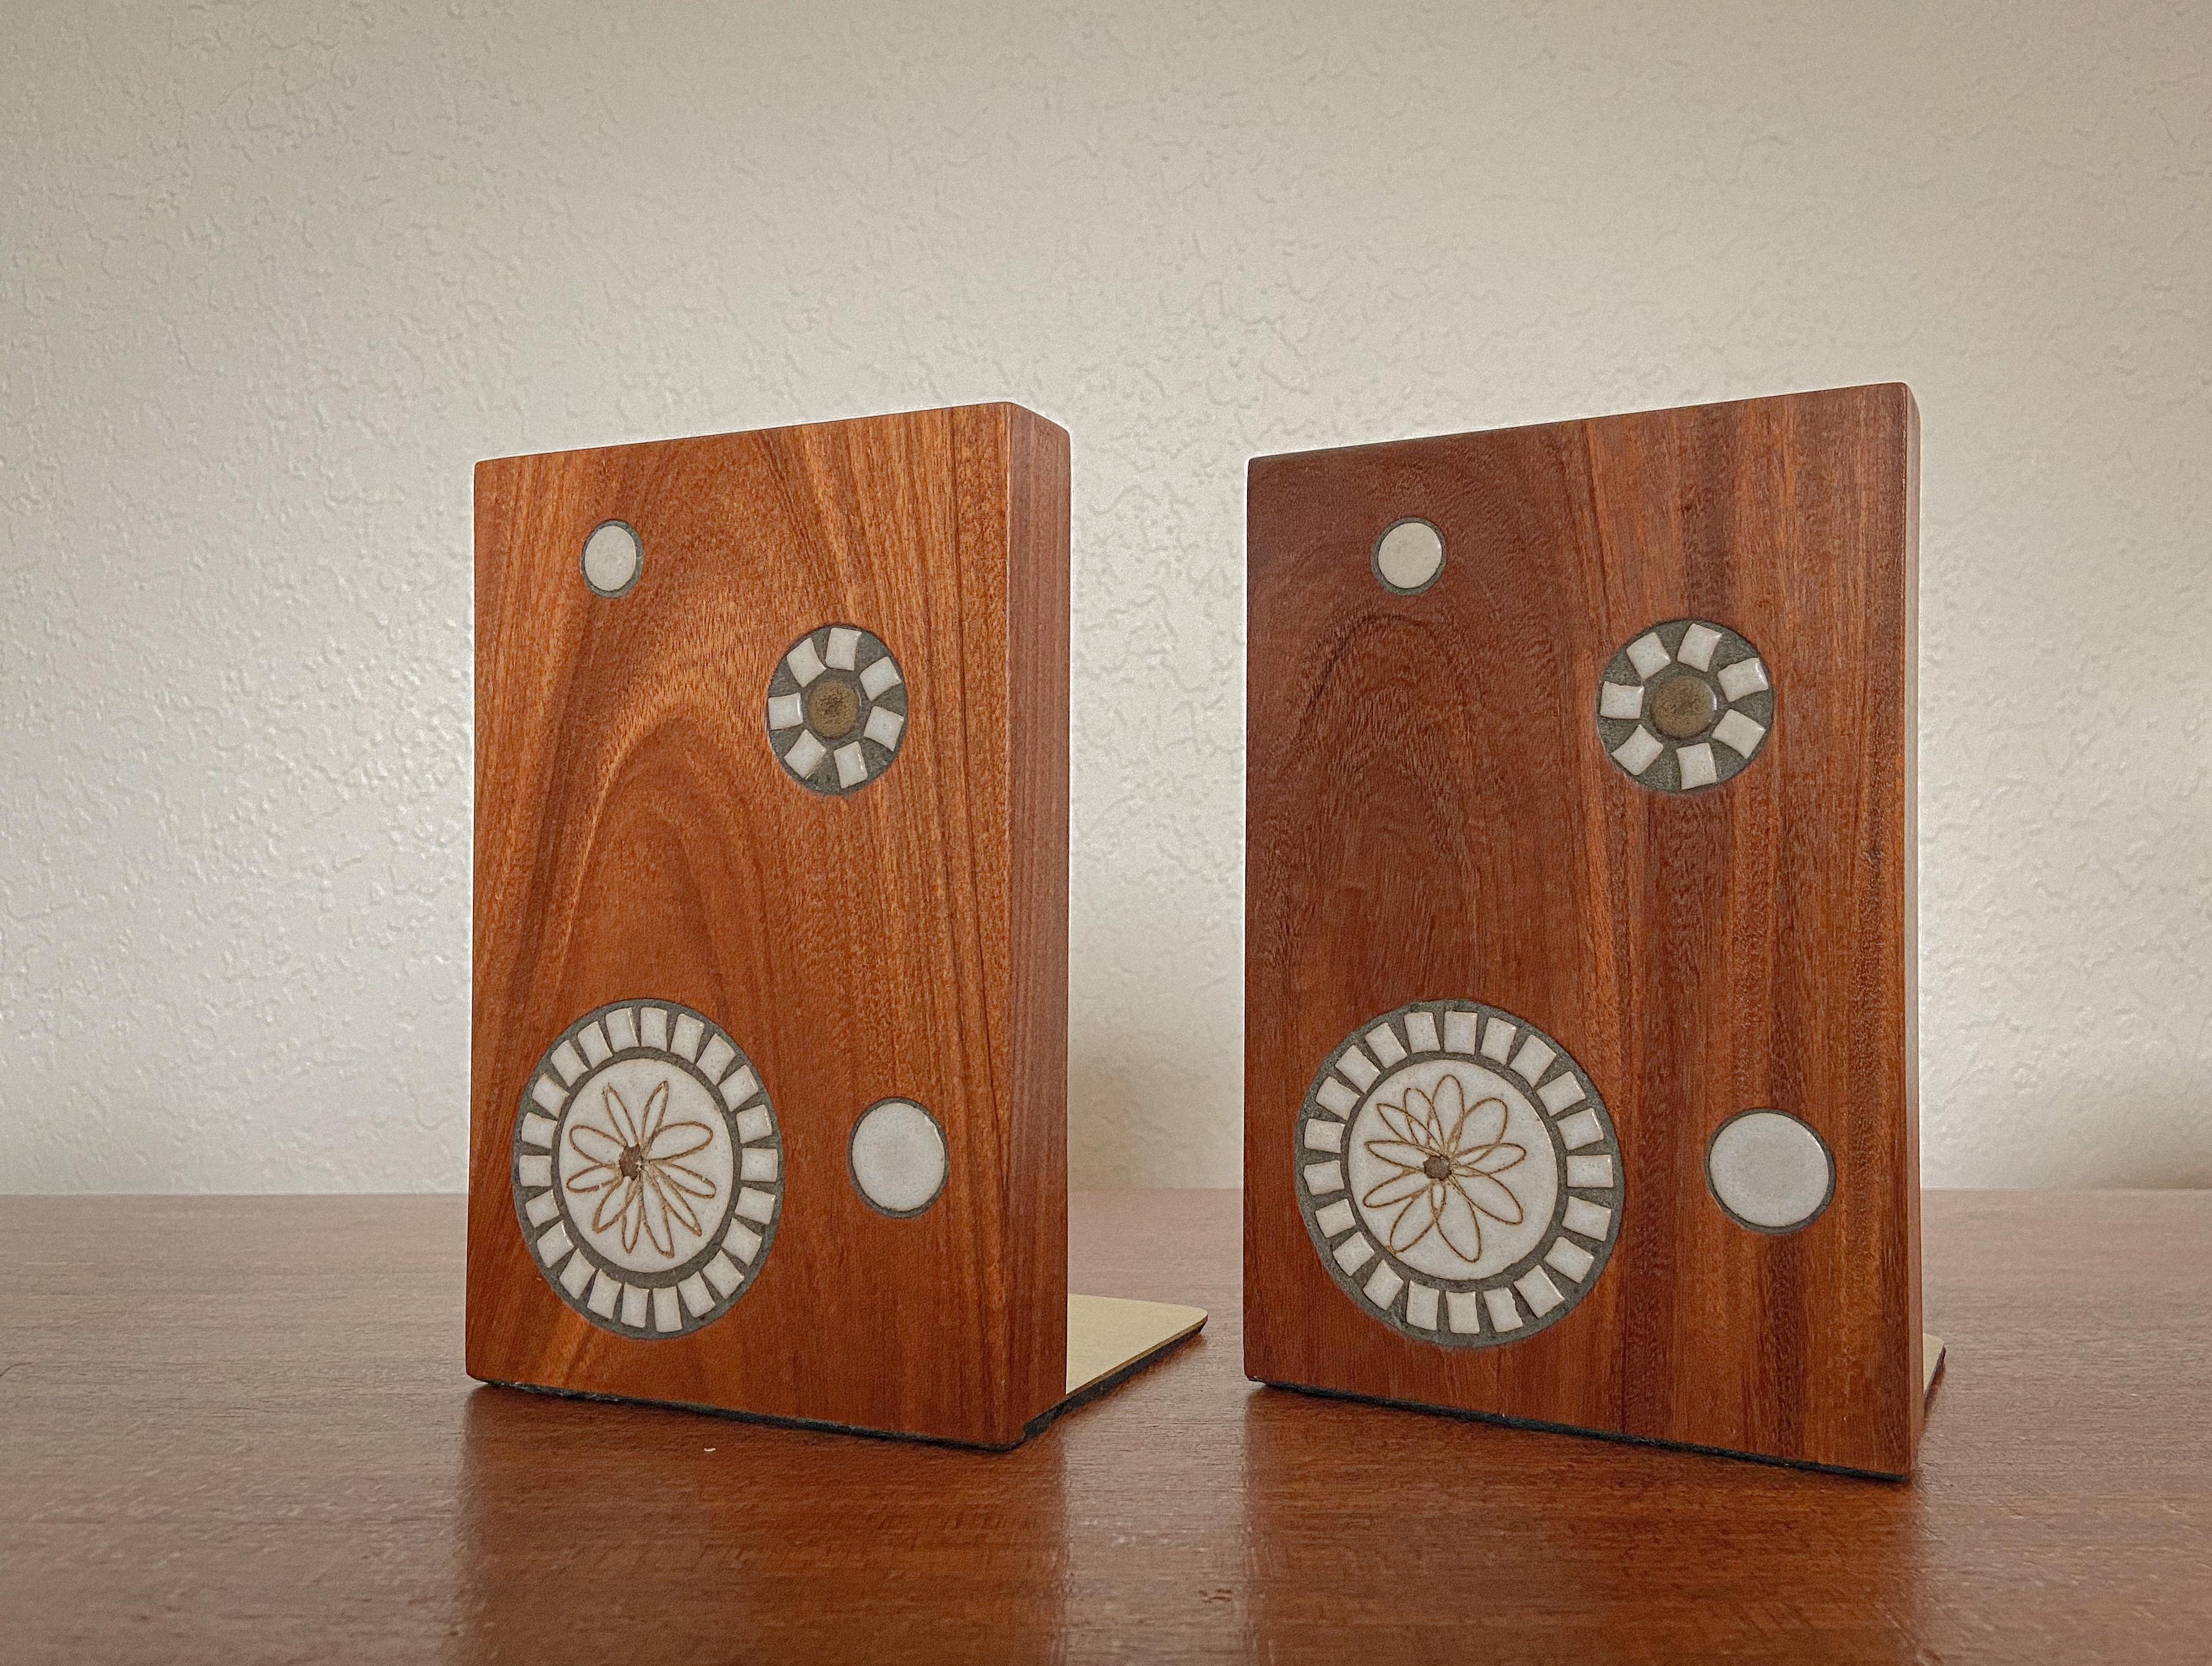 A unique and wonderful set of bookends designed by Gordon and Jane Martz for Marshall Studios. These feature solid walnut bodies inlaid with handmade glazed ceramic tiles, These are a bit unique because they feature a sgraffito pattern on the